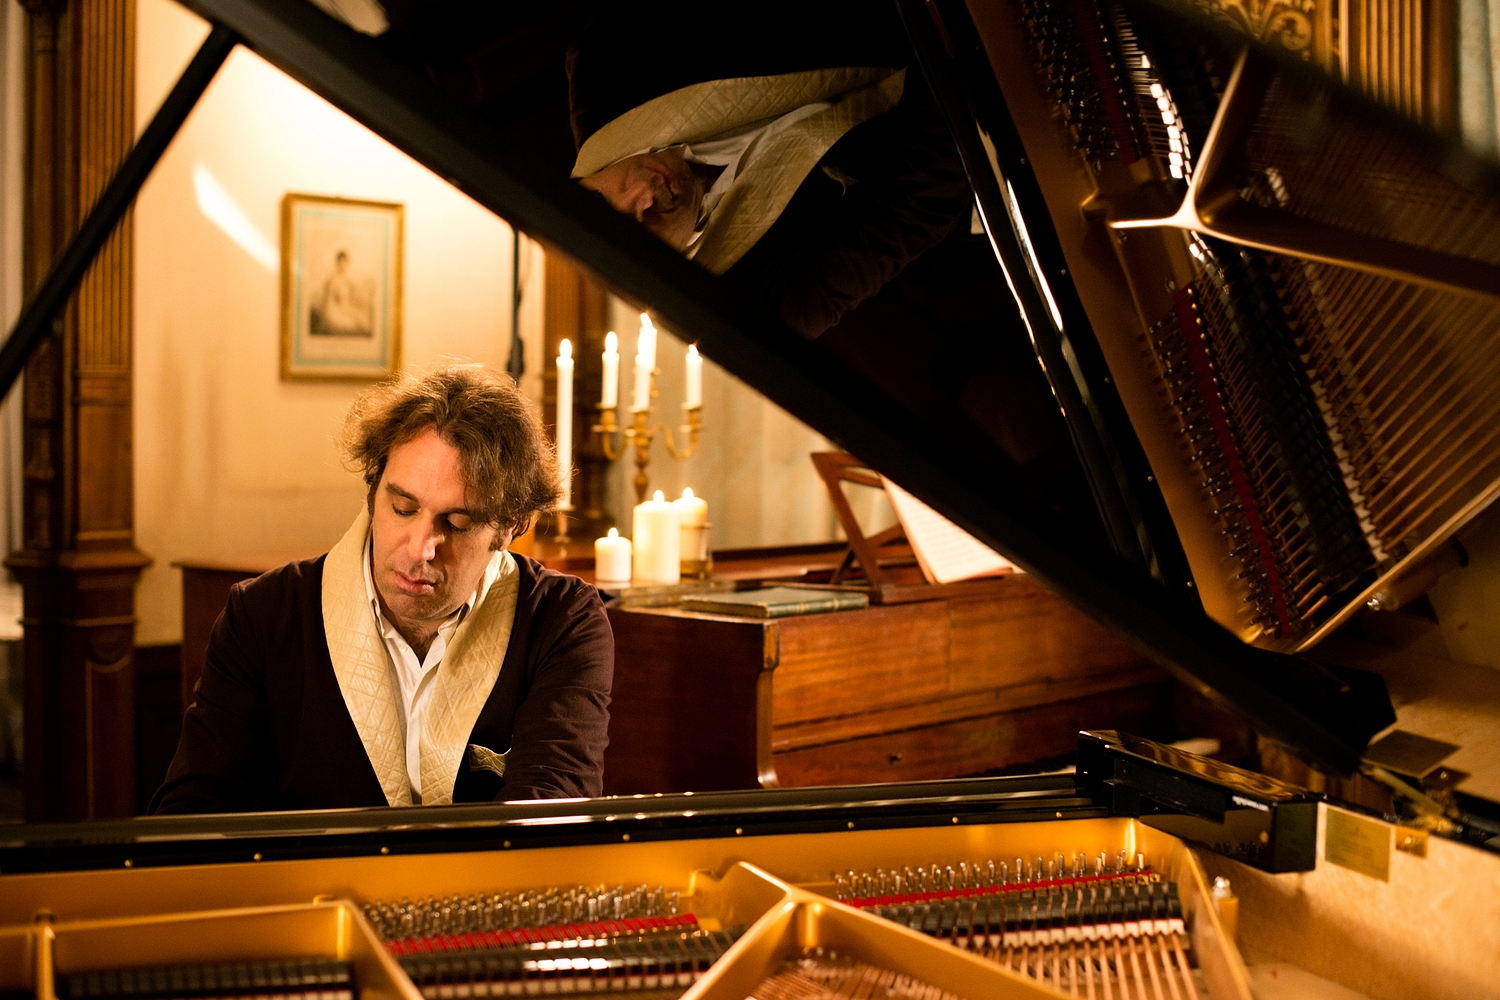 Chilly Gonzales breaks down the magic of The Weeknd’s ‘Can’t Feel My Face’